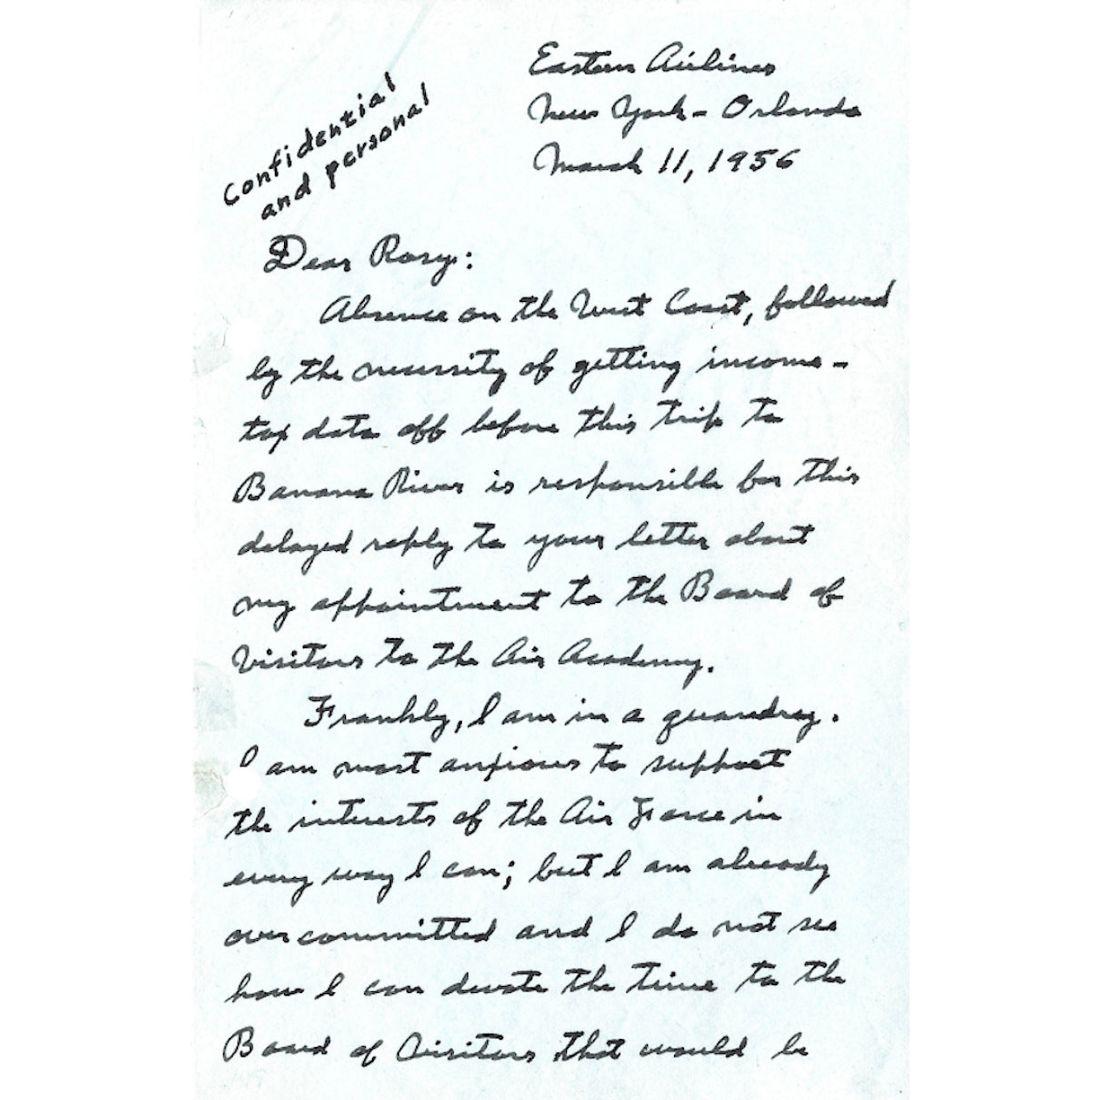 A revealing handwritten letter, signed by the pioneering aviator Charles Lindbergh (1902 – 1974). 

The letter comprises five pages, each measuring 5.5” by 8.25”, and is dated March 11, 1956.

The letter is addressed to Lt. General Emmett O'Donnell,